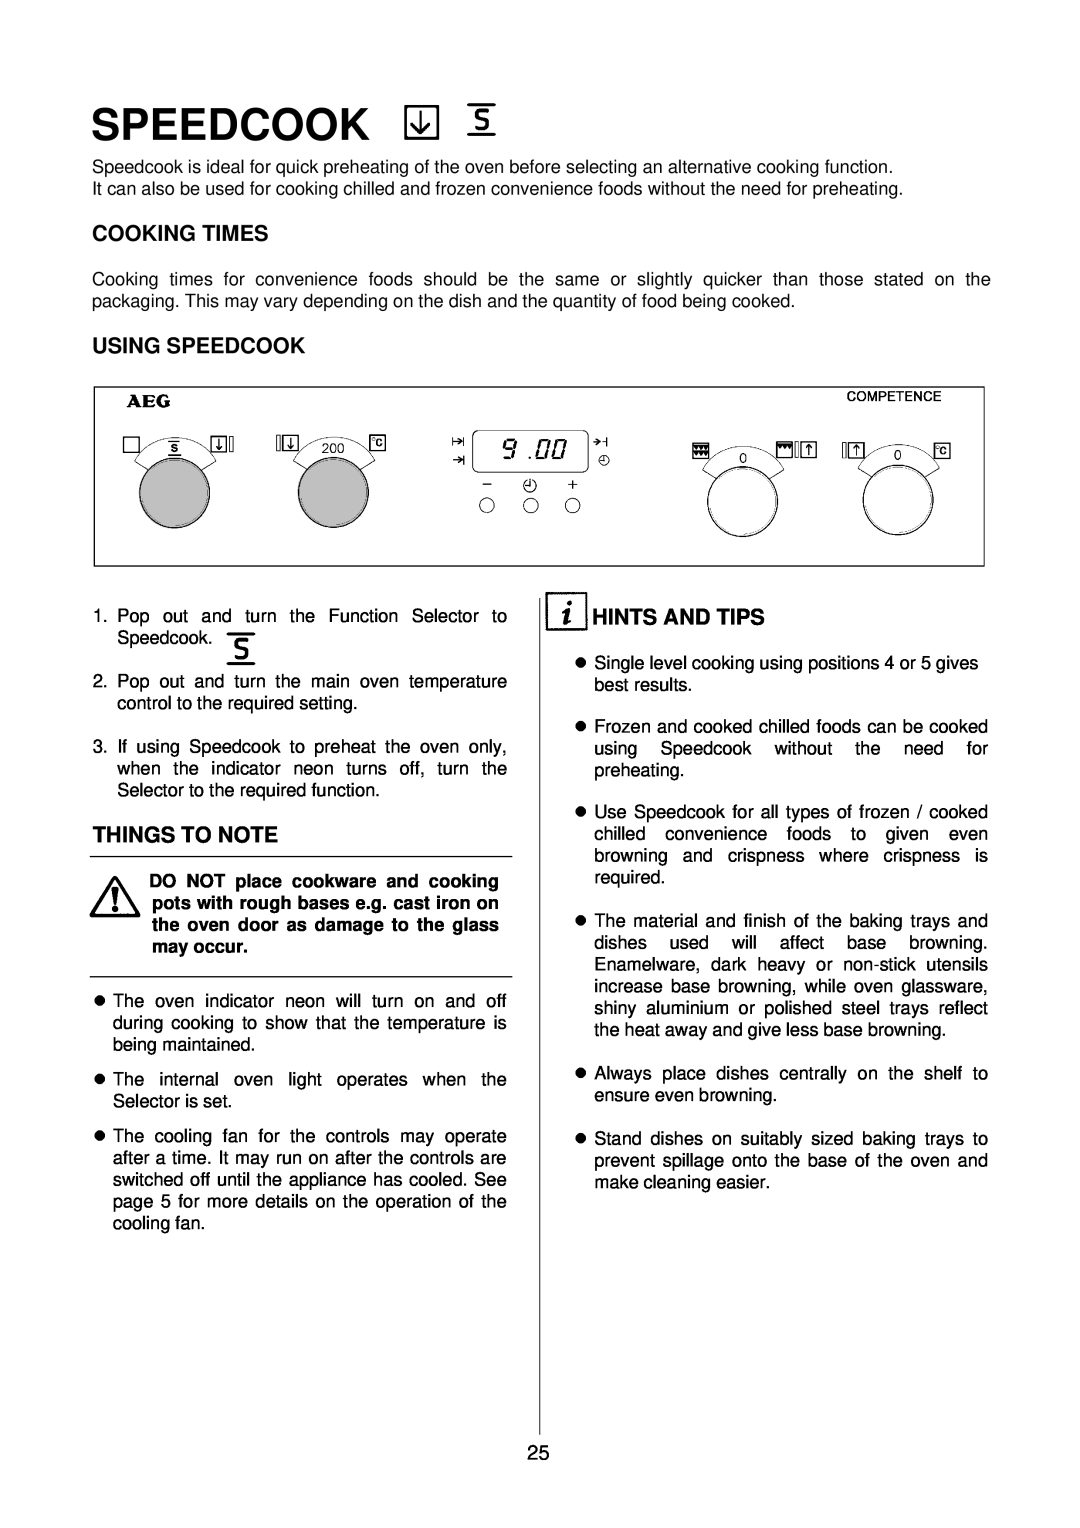 Electrolux D4100-1 operating instructions Cooking Times, Using Speedcook, Things To Note, Hints And Tips 